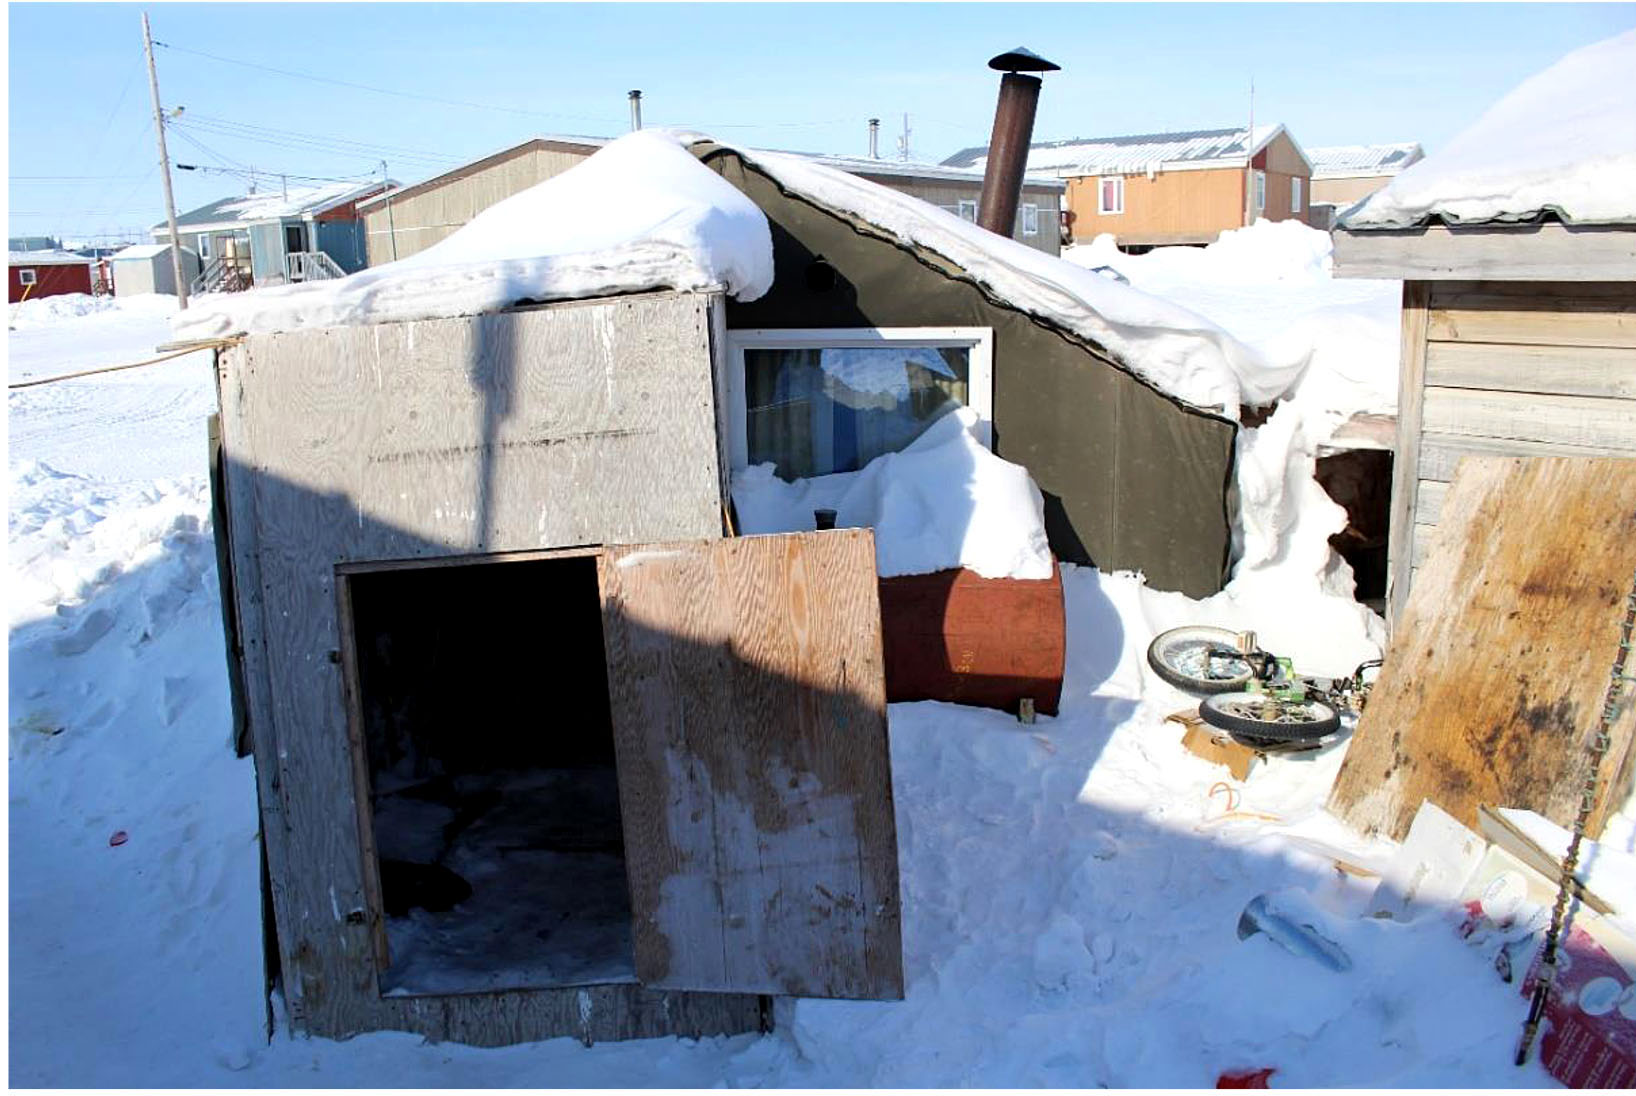 This badly constructed wooden shed in Igloolik housed a young family at the time the photo was taken. (IMAGE FROM SENATE COMMITTEE REPORT)